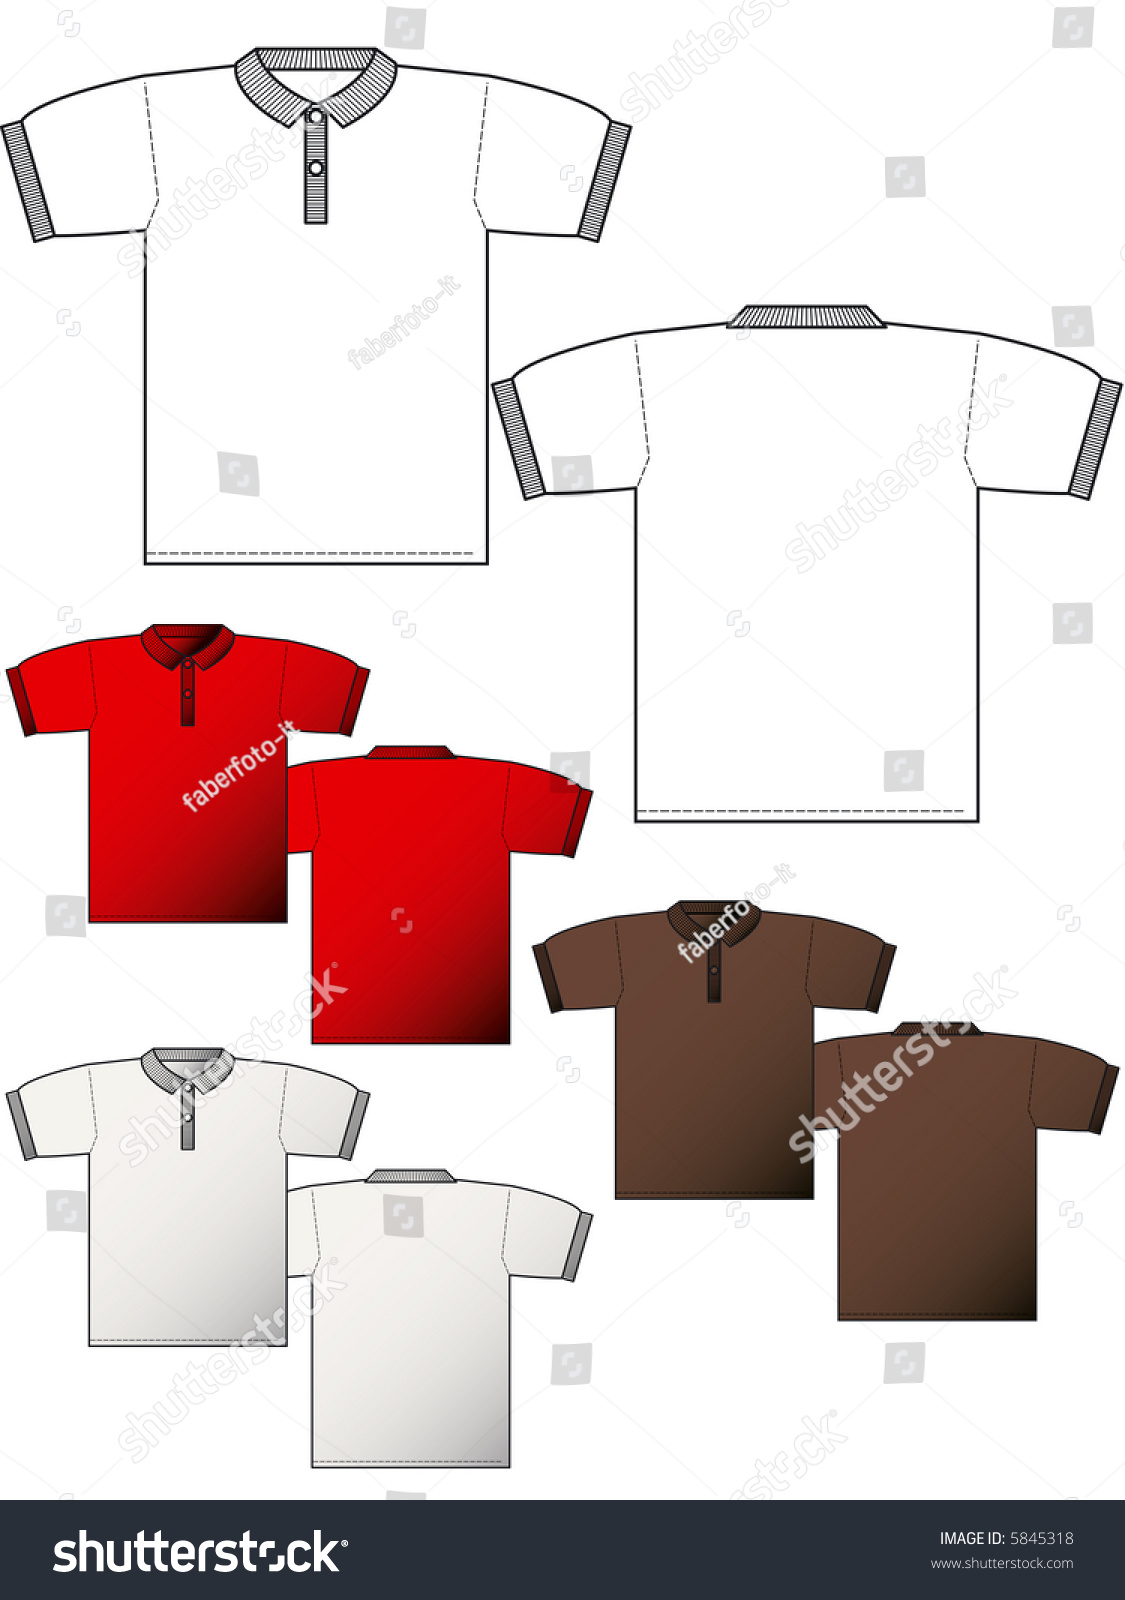 Collar Ribbed Tshirt Back Front Layout Stock Vector 5845318 - Shutterstock